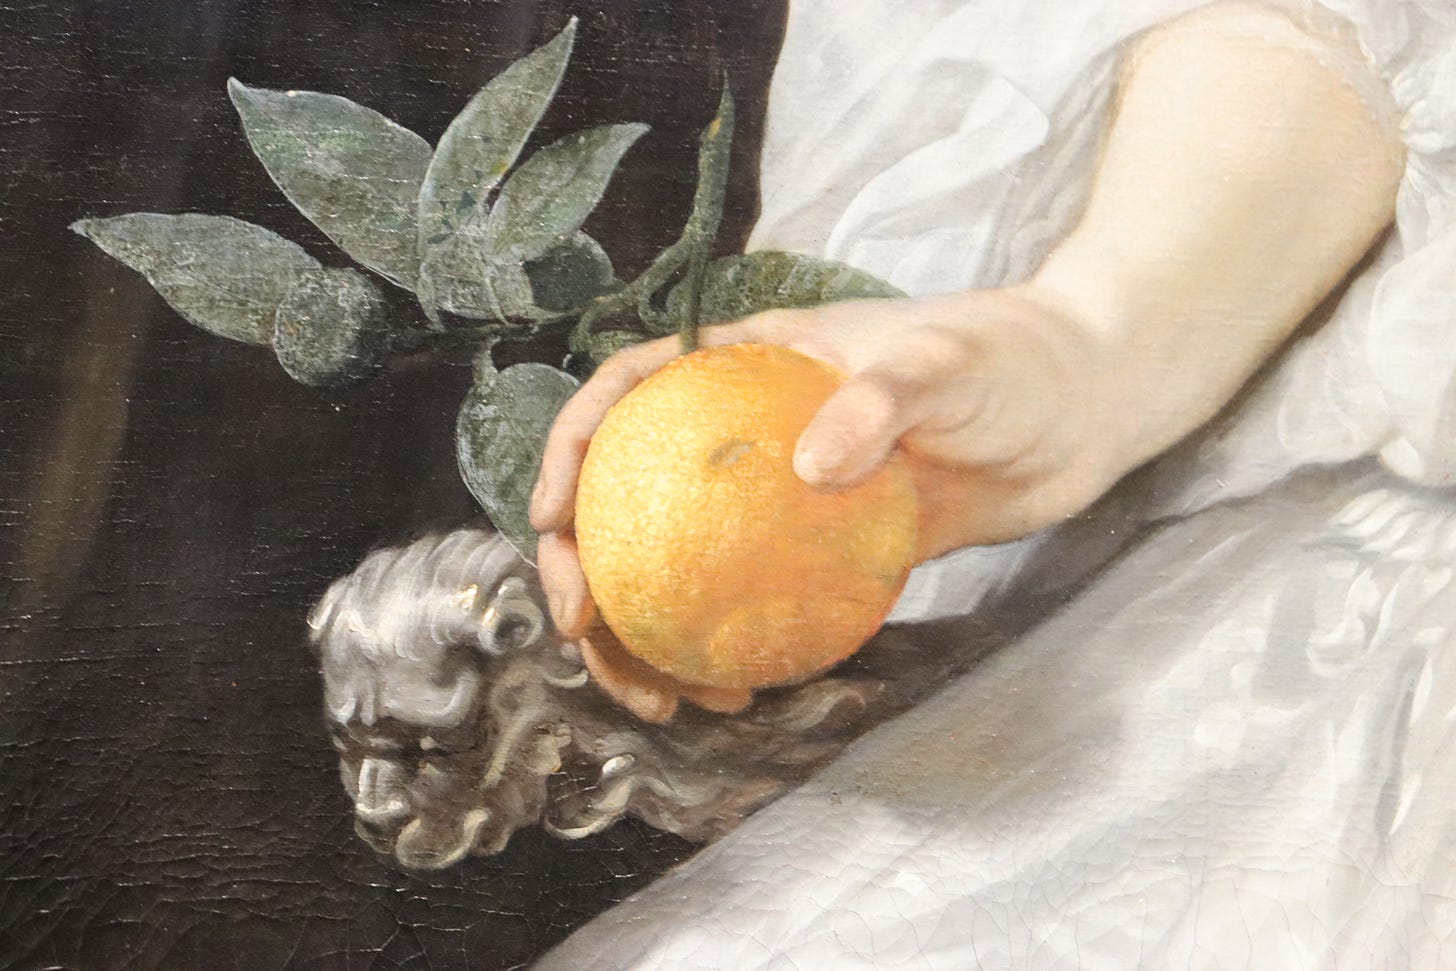 Closeup of a woman's hand holding an orange, from a painting in the Rijksmuseum's collection